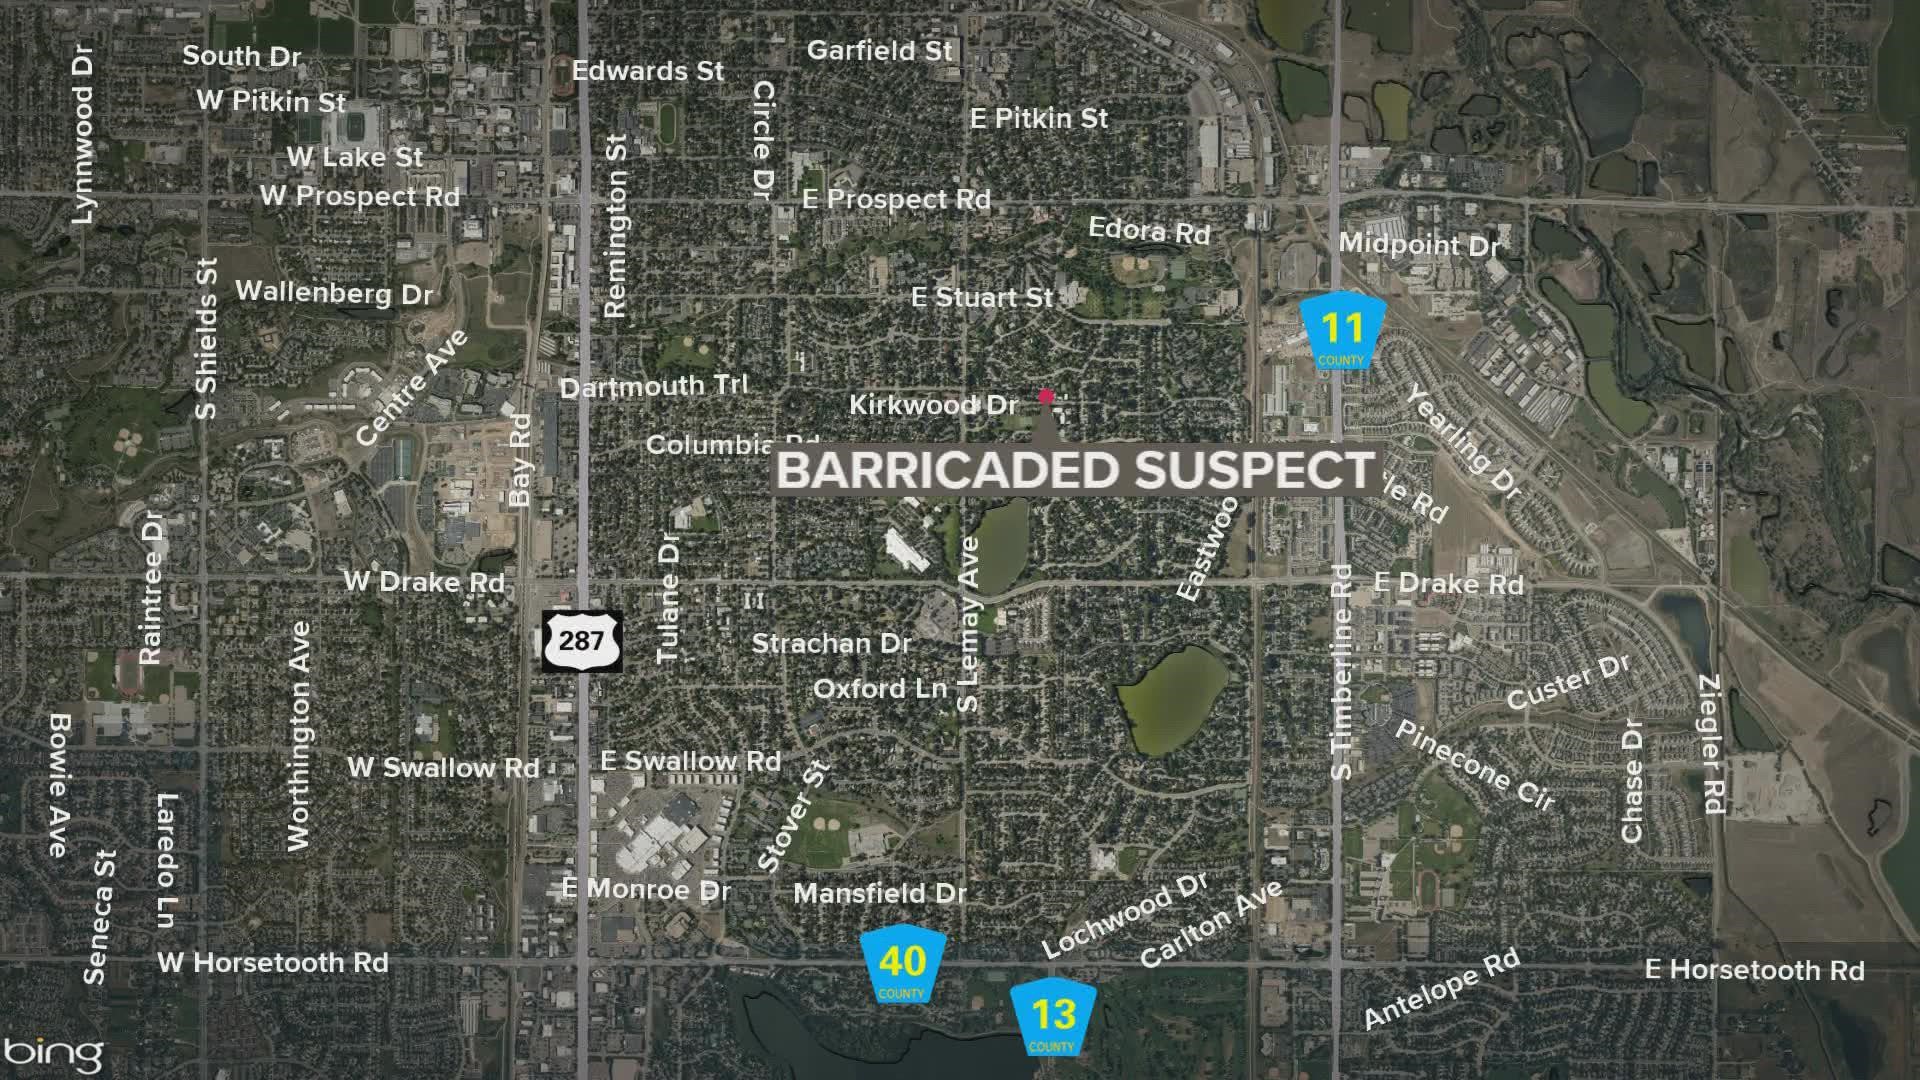 A burglary suspect who may be armed broke into an apartment in the 1300 block of Kirkwood Drive and barricaded himself inside, police said.